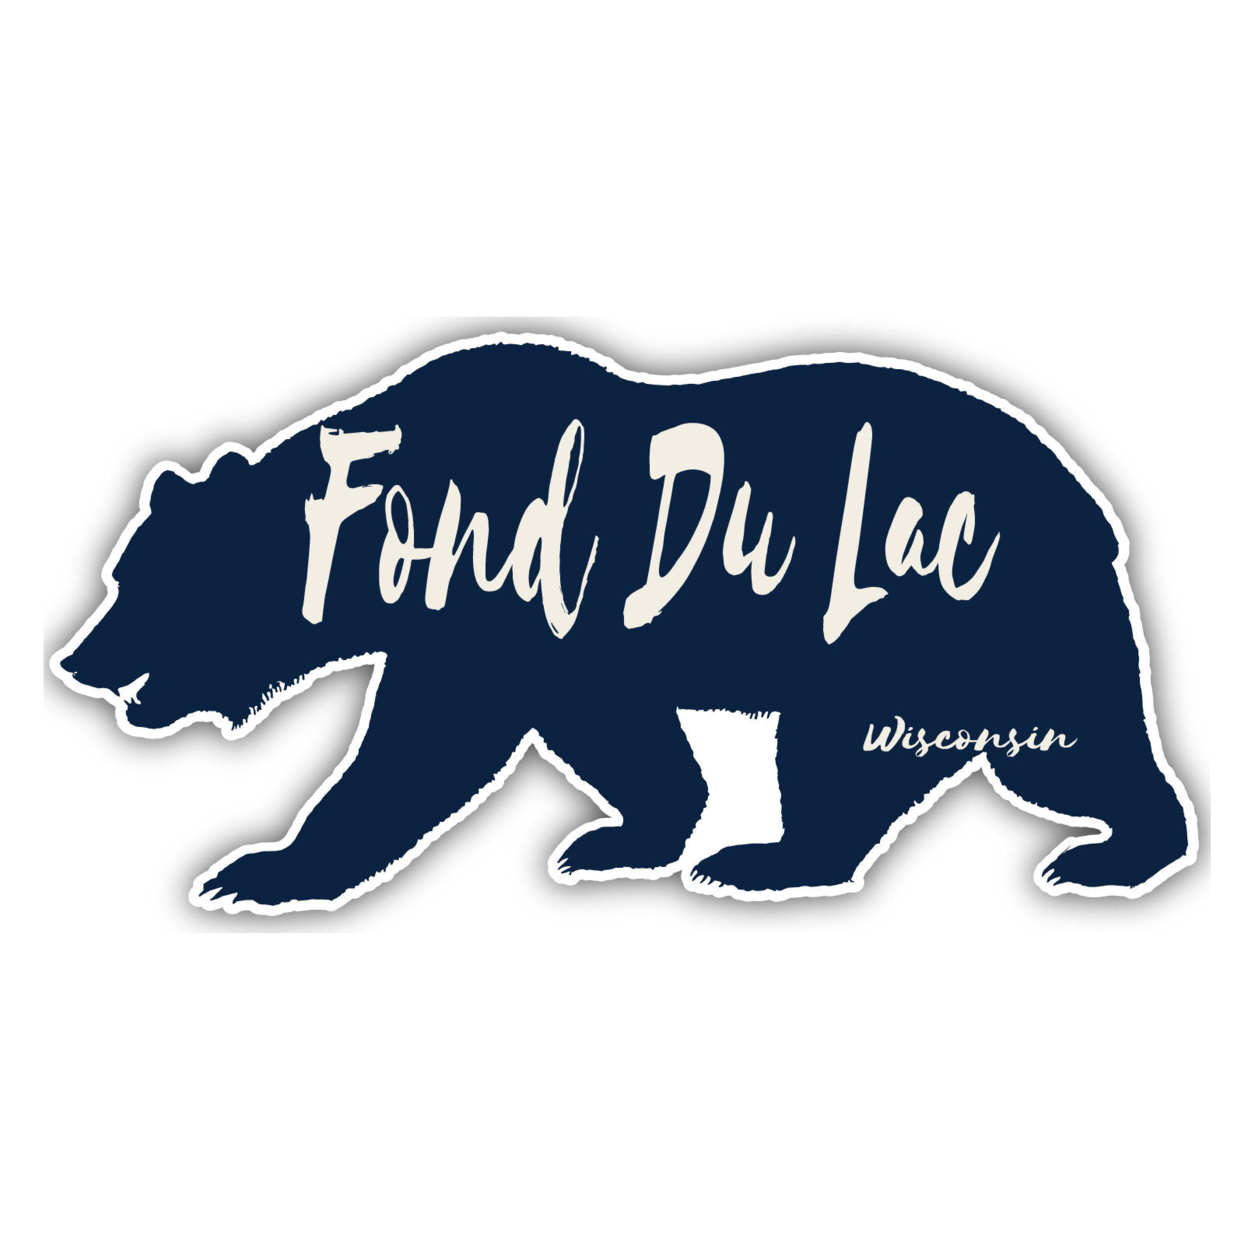 Fond Du Lac Wisconsin Souvenir Decorative Stickers (Choose Theme And Size) - Single Unit, 10-Inch, Great Outdoors